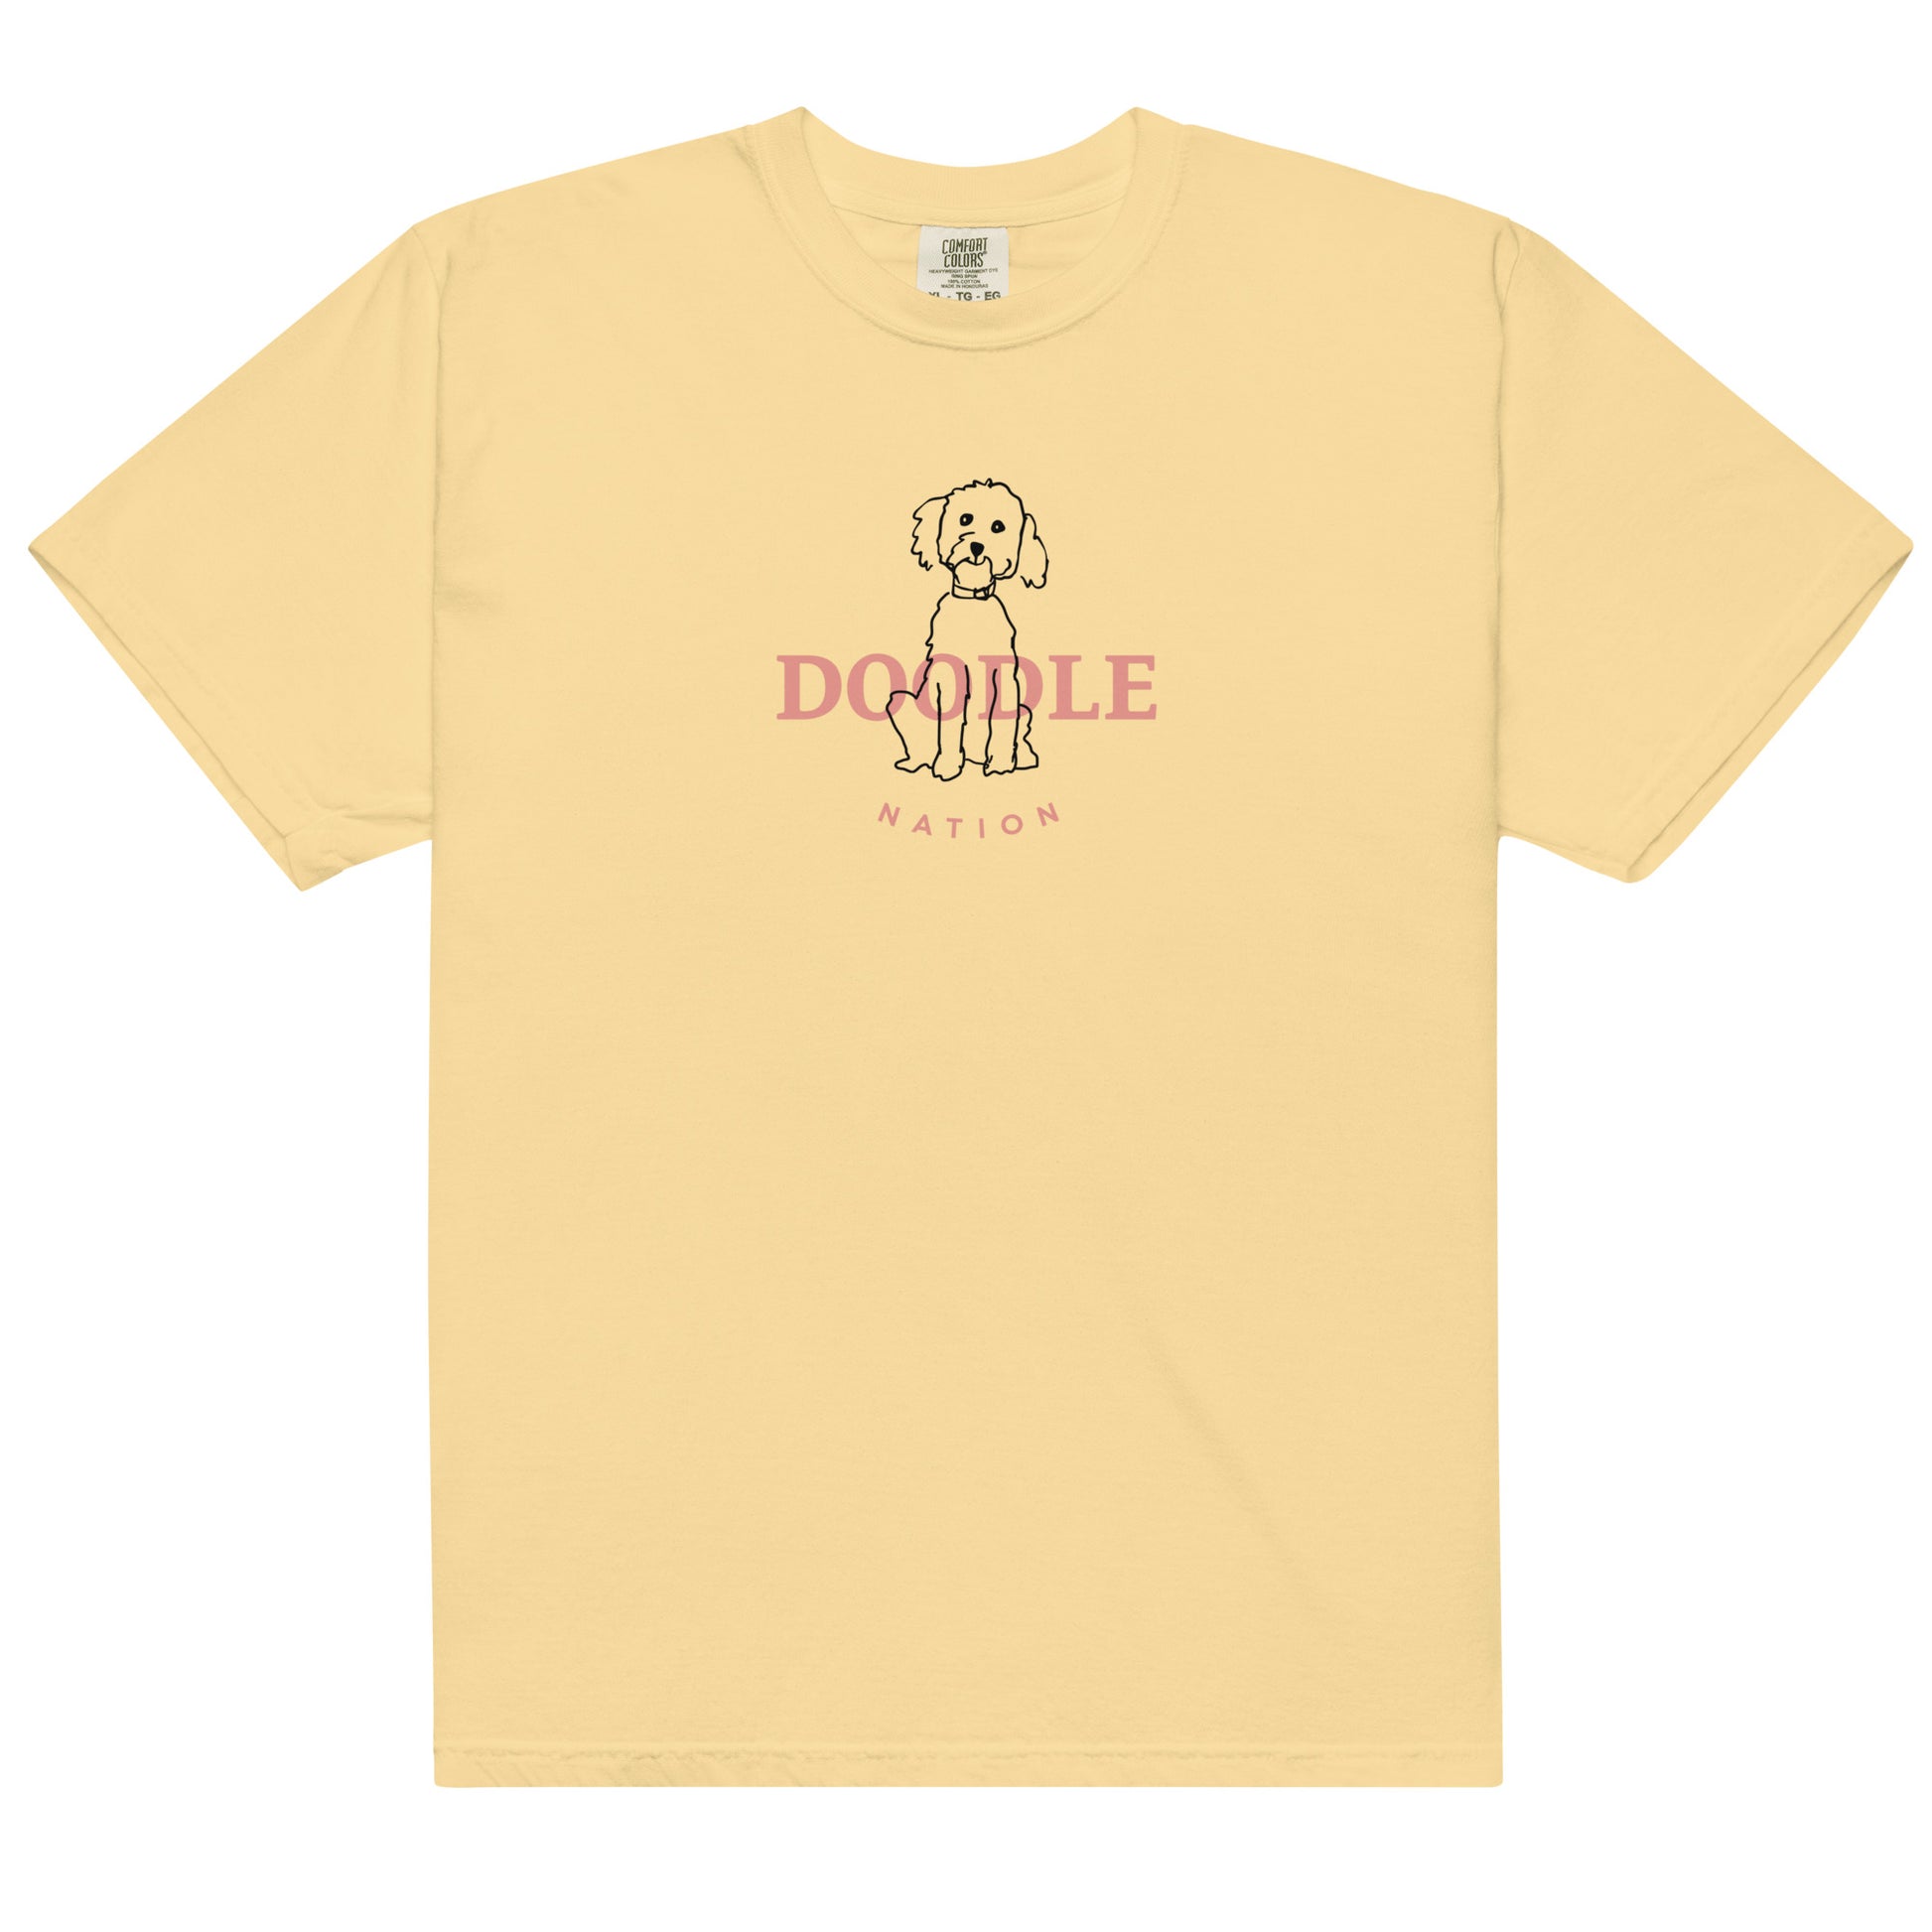 Goldendoodle comfort colors t-shirt with Goldendoodle and words "Doodle Nation" in butter ccolor